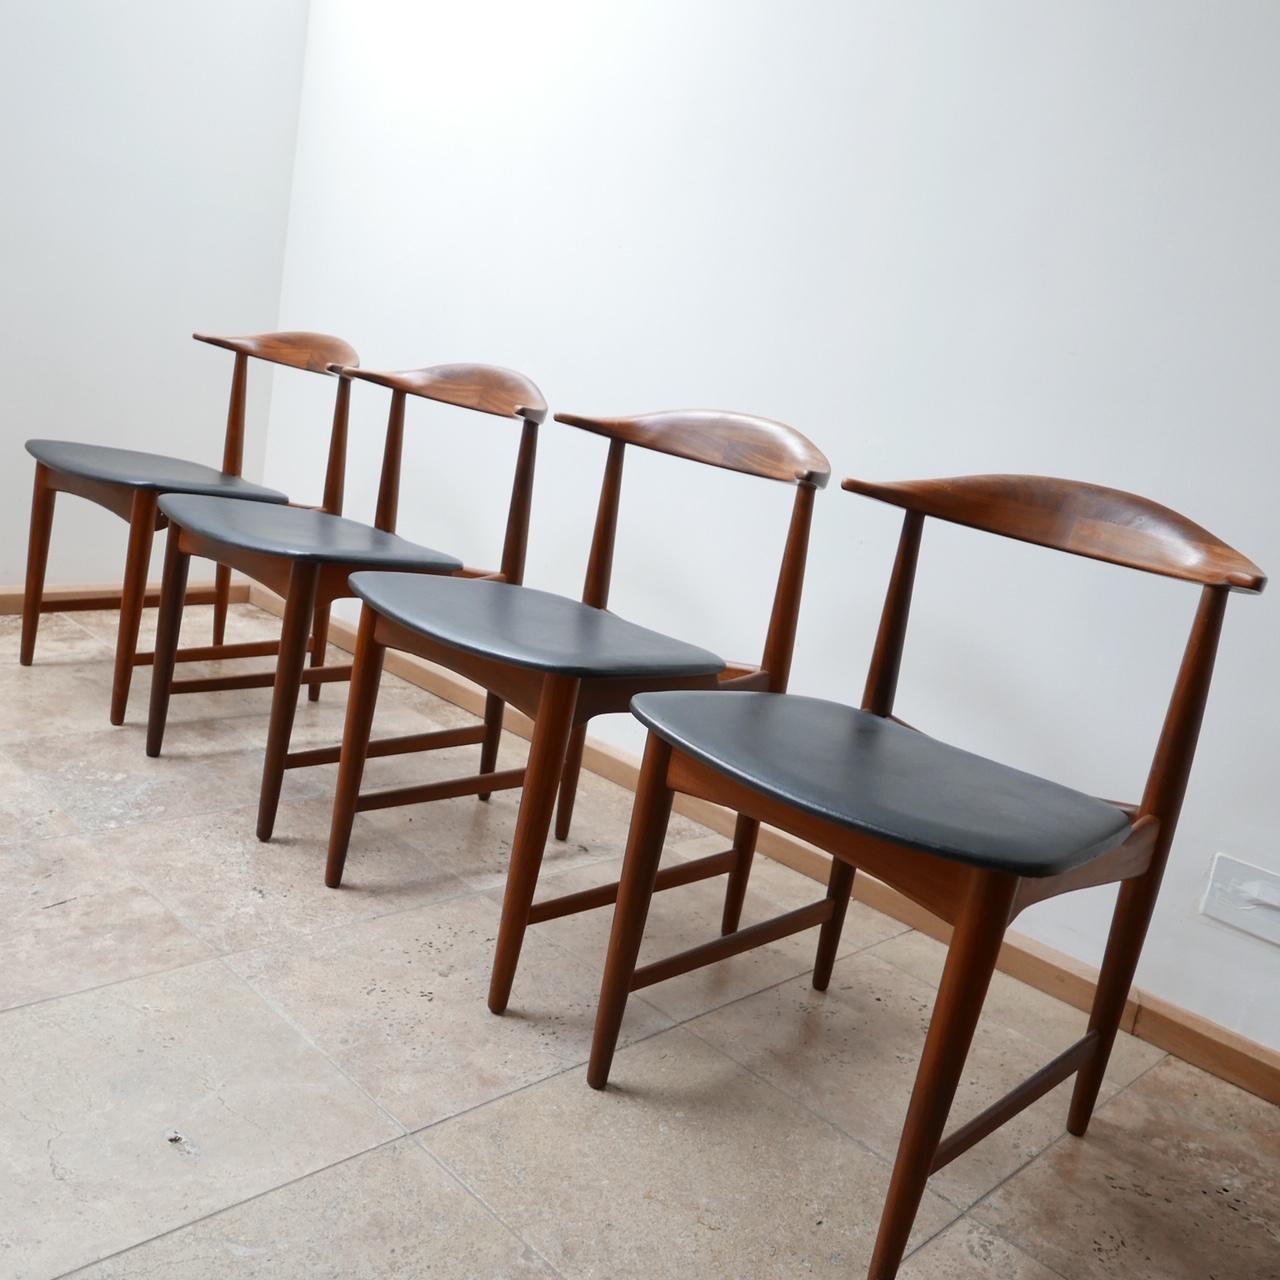 An immaculate set of four dining chairs.

Denmark, circa 1960s.

Teak construction with black leather upholstered seats.

In the manner of Hans J Wegner or Knud Faerch.

Dimensions: 48 W x 50 D x 44 seat height x 72 total Height in cm.